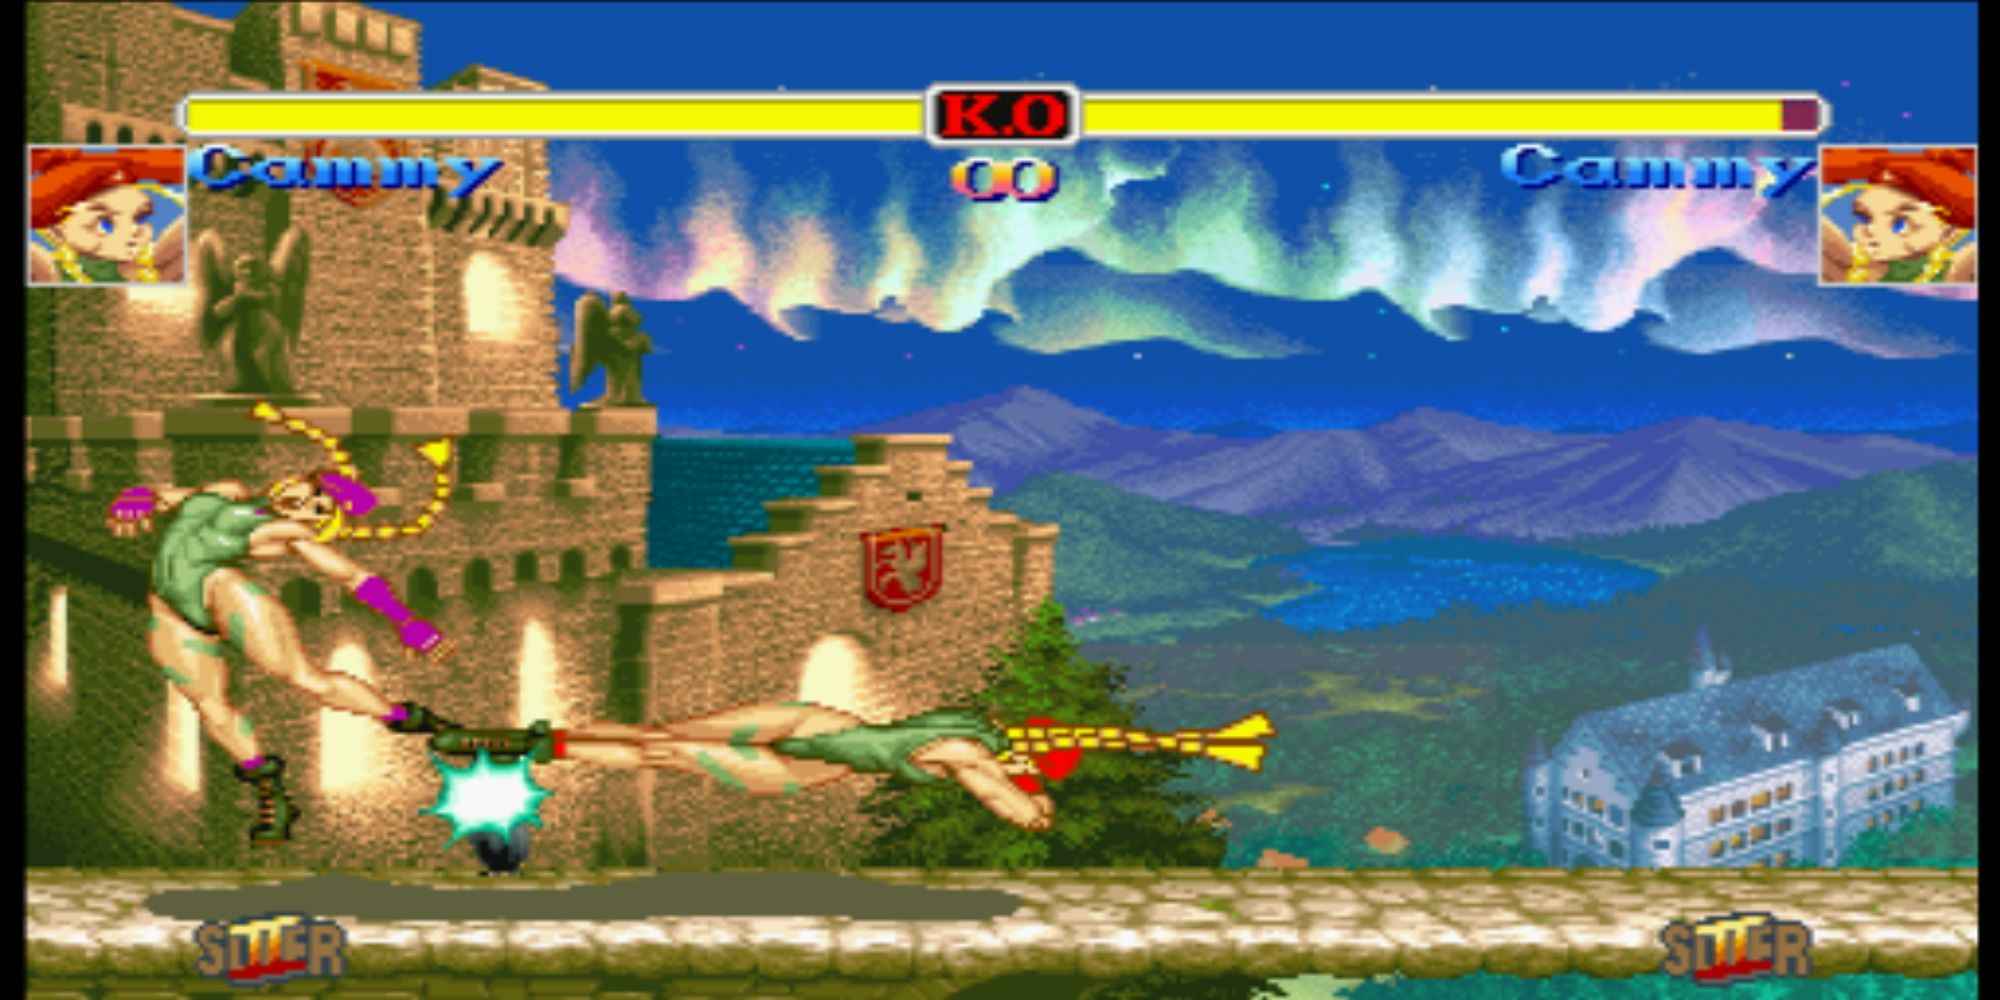 Super SF2 Cammy hits Cammy with a Cannon Spike at an English Manor in Hyper Street Fighter 2.